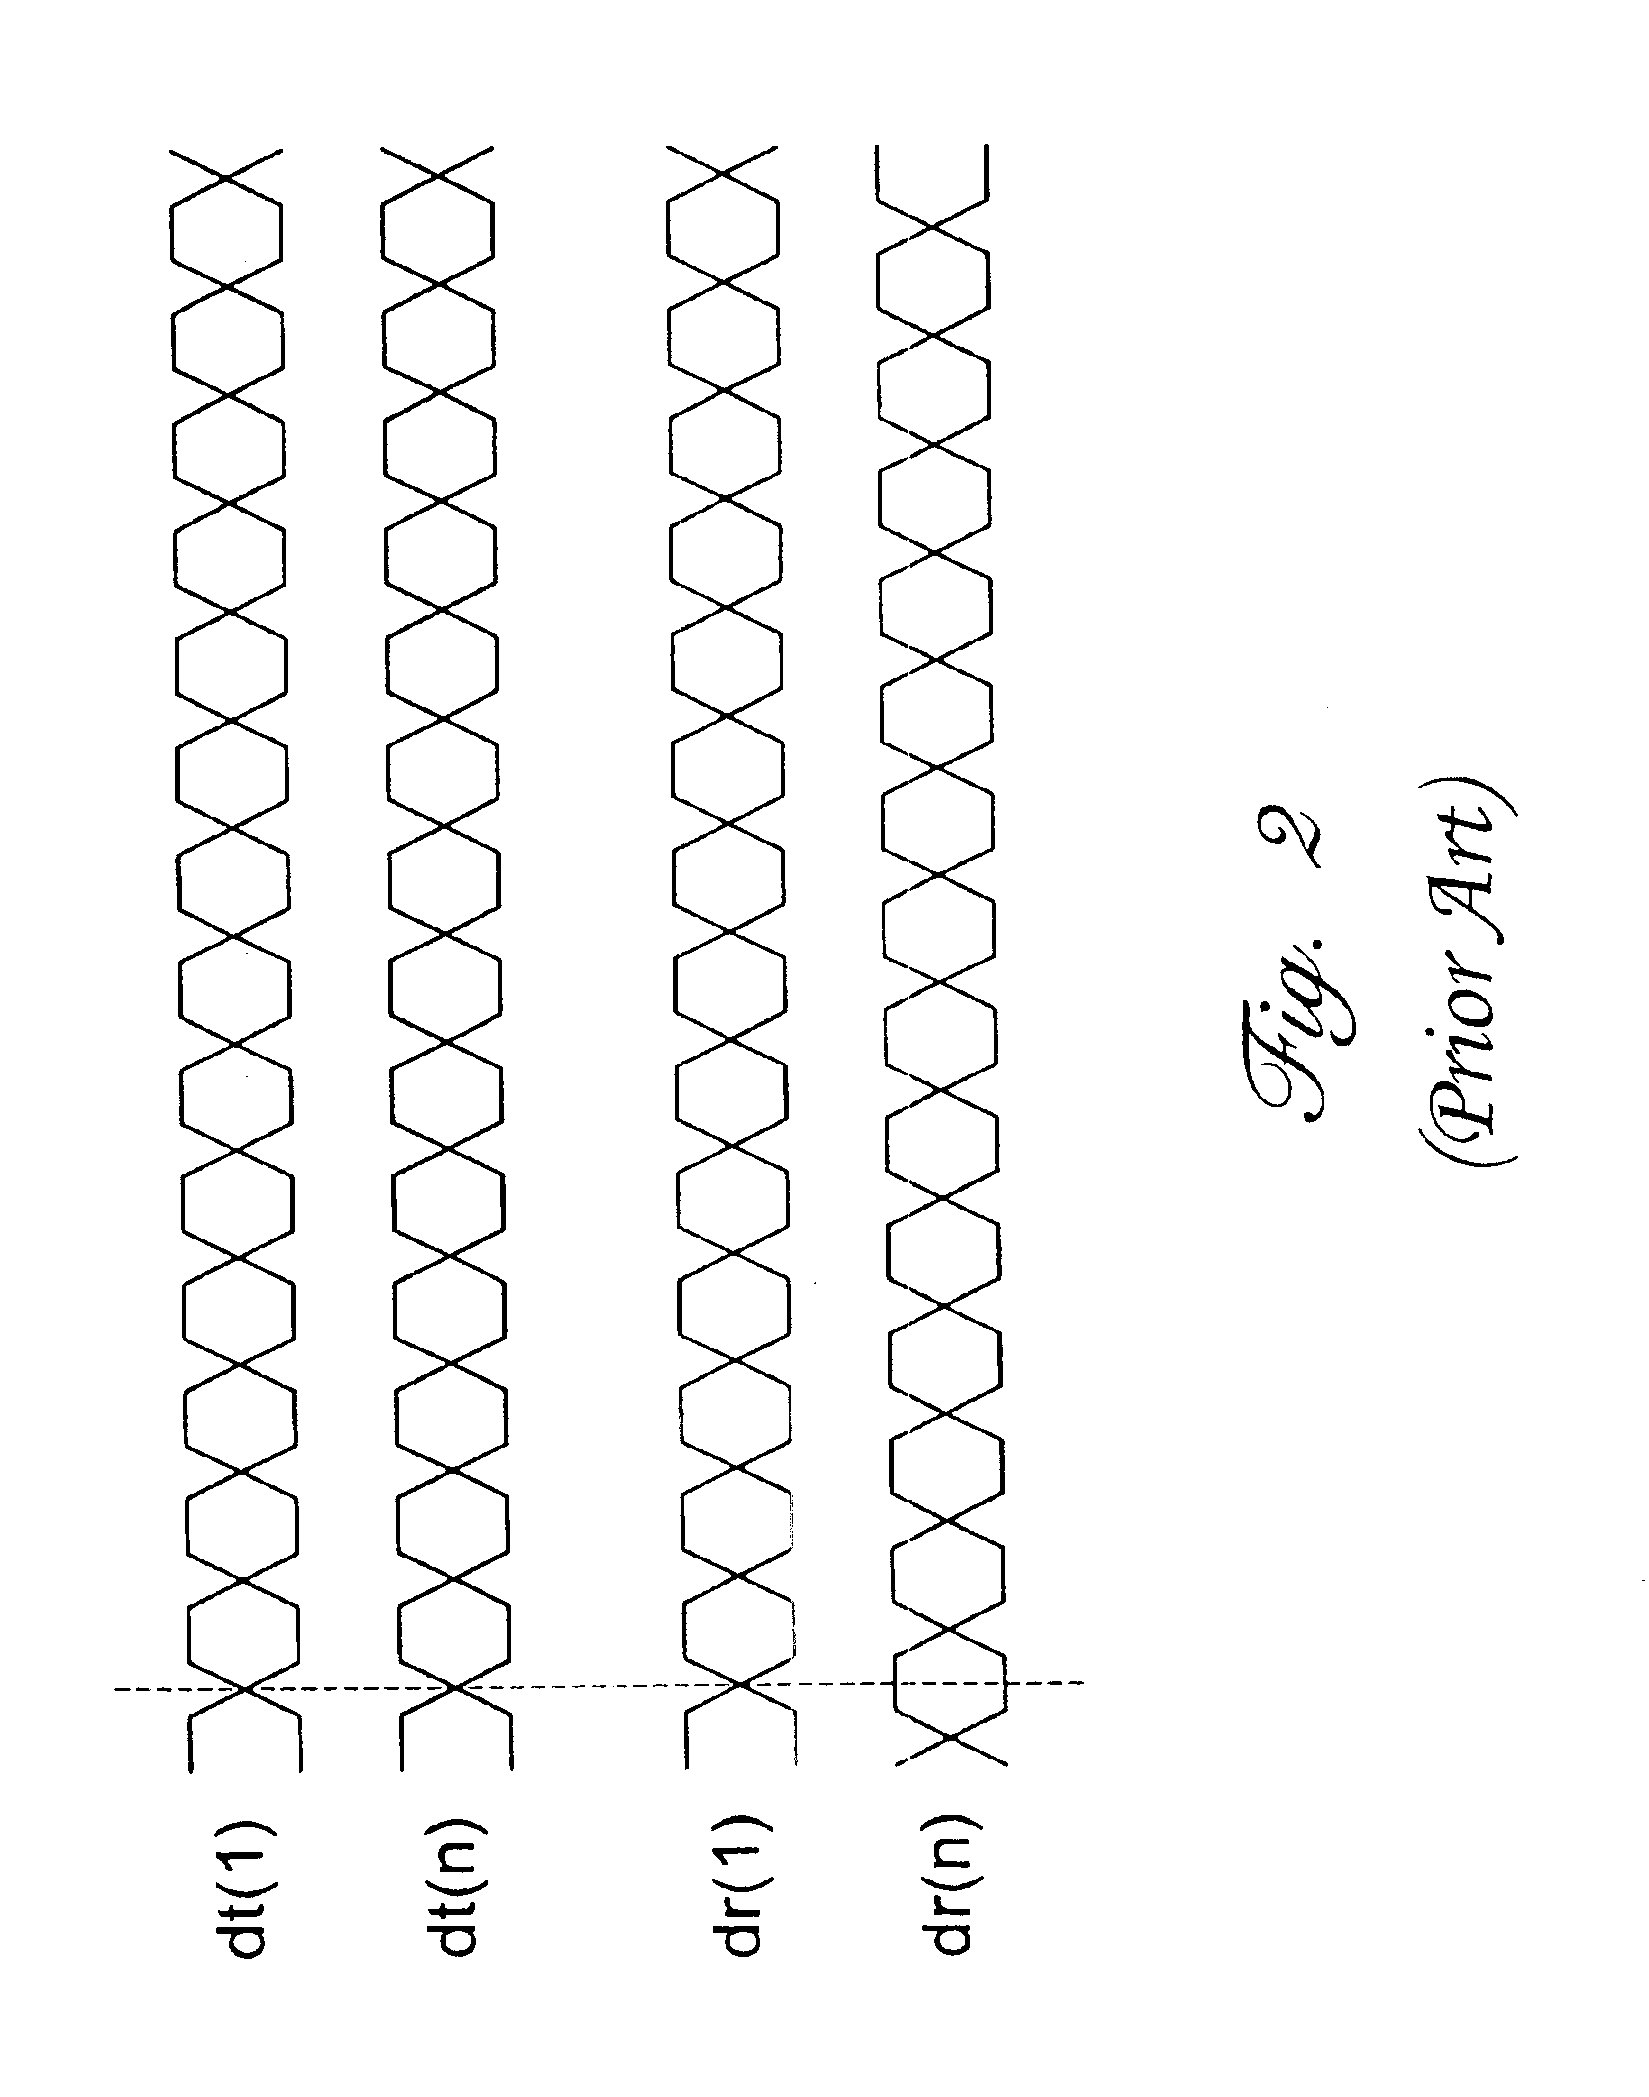 Multi-link receiver for processing multiple data streams